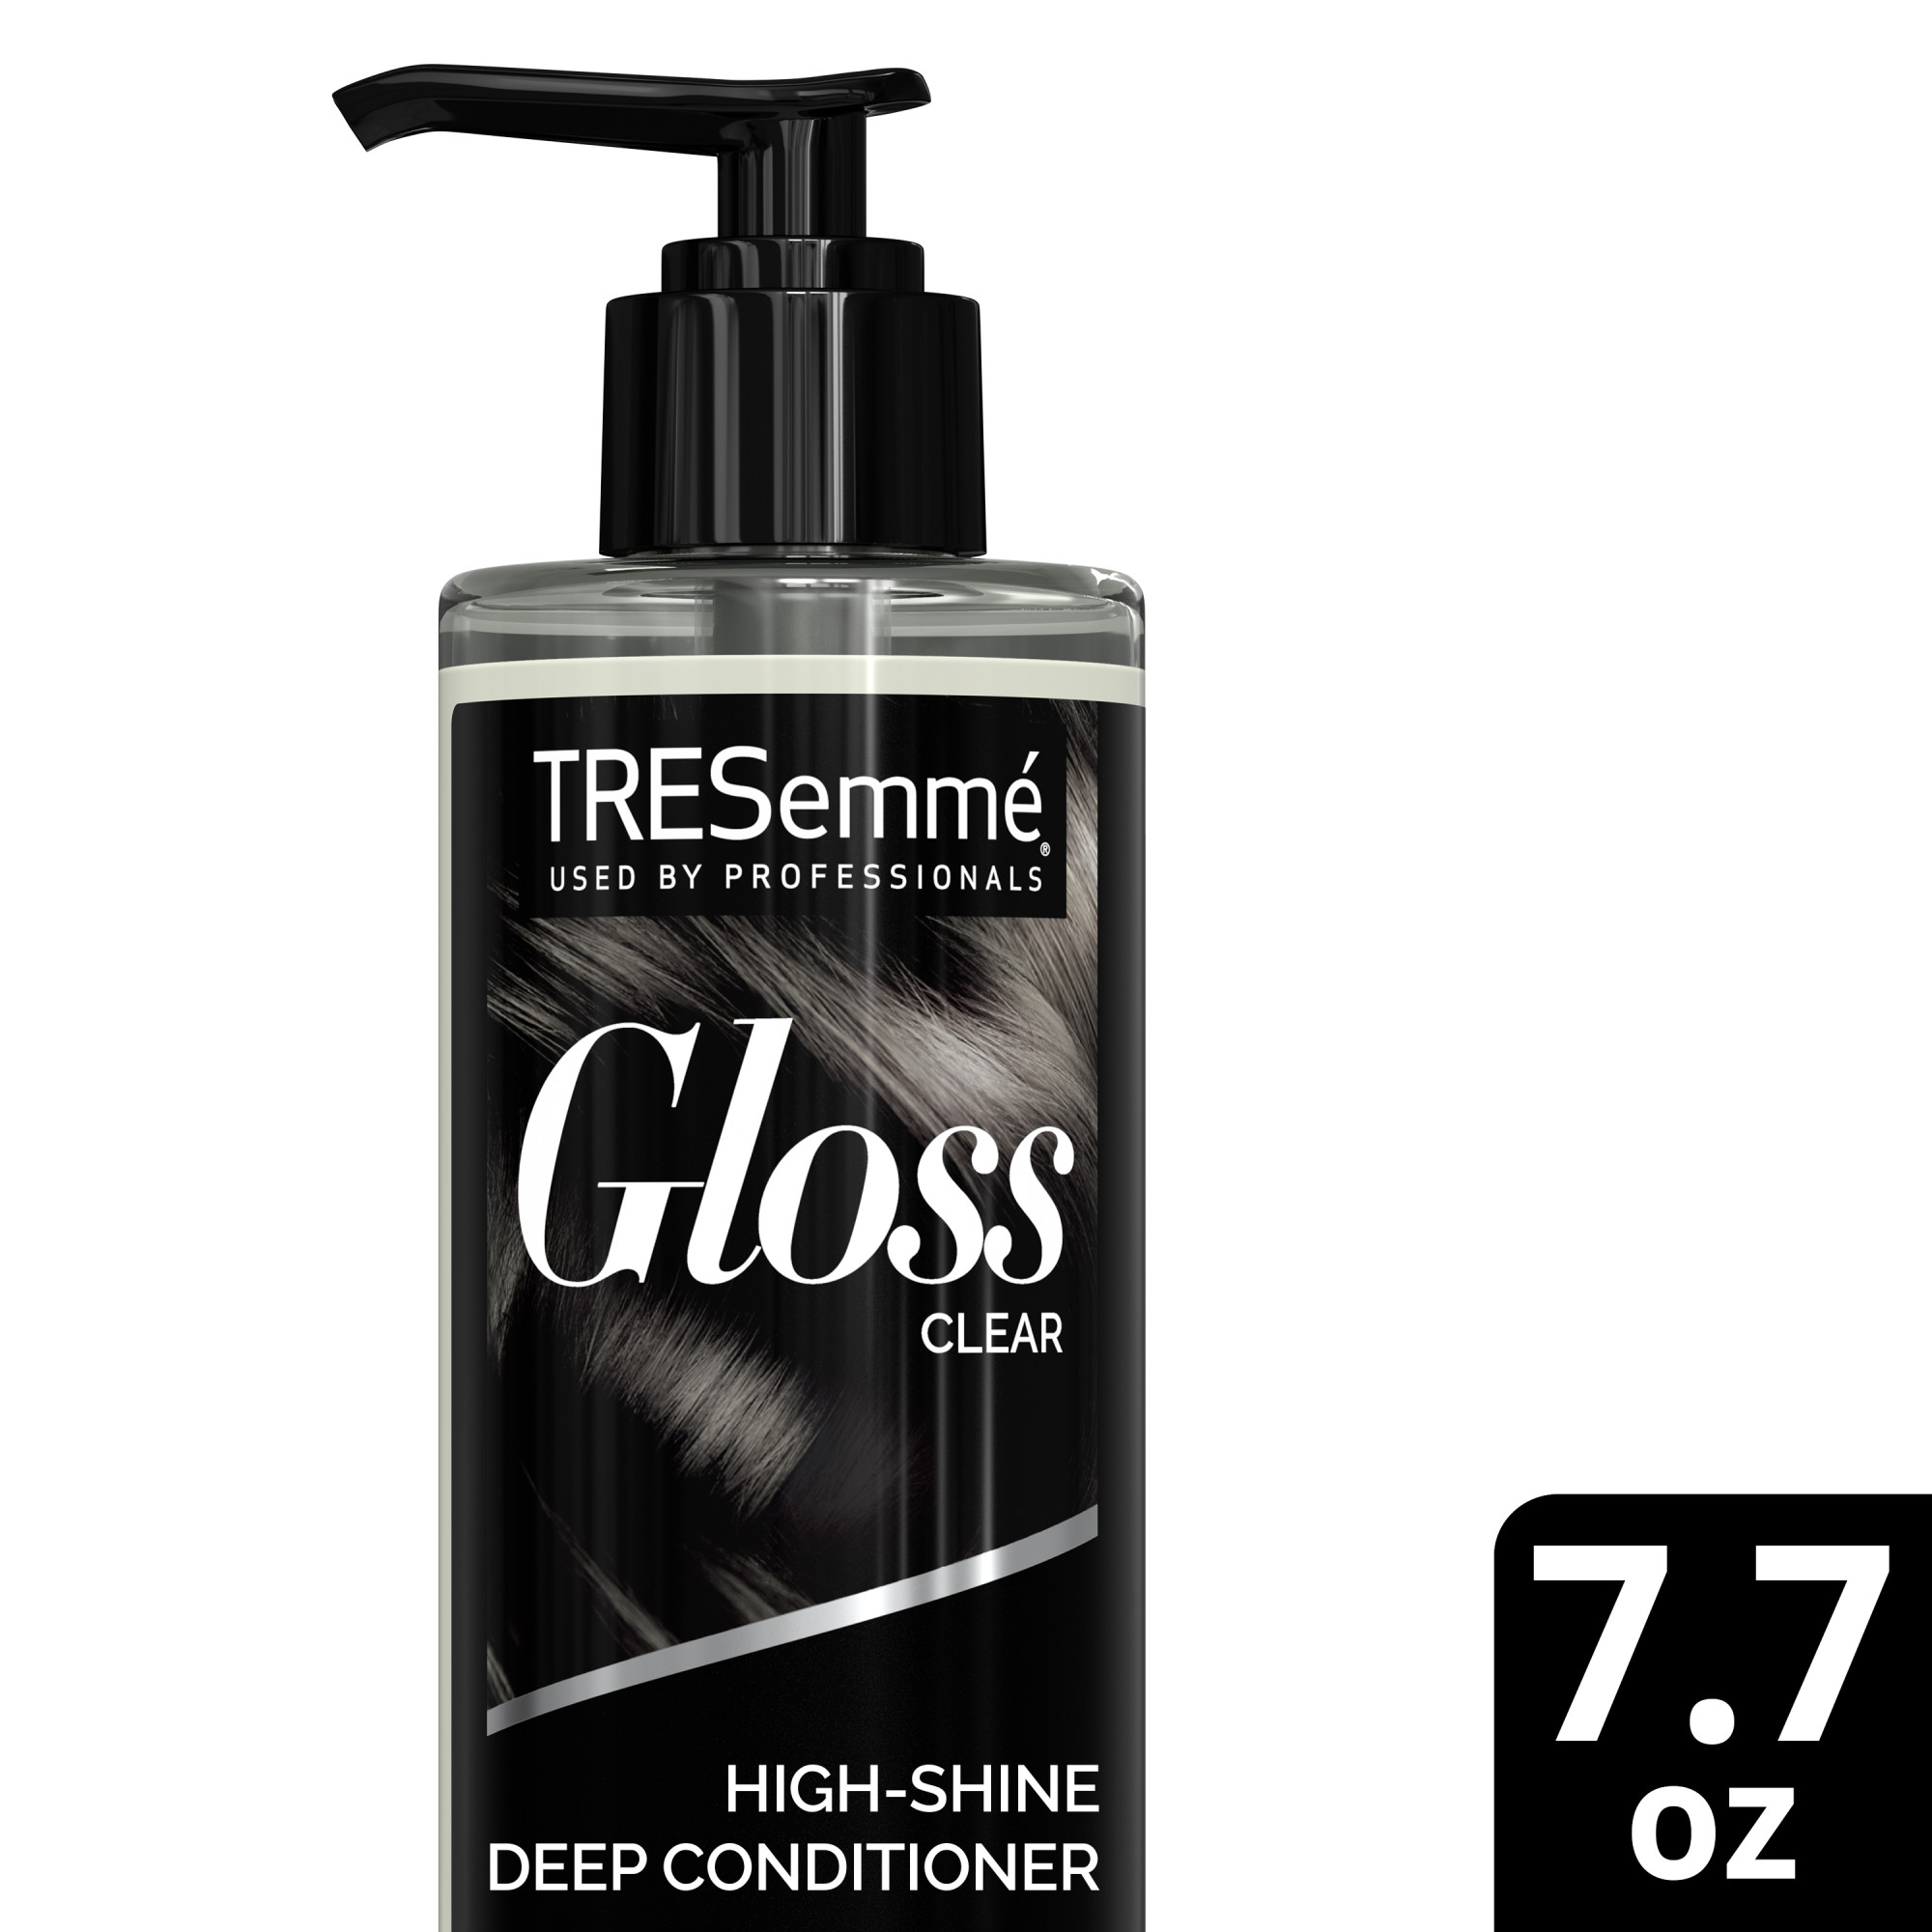 Tresemme Gloss Clear Provides 3-Minute Results in Shower Color Enhancing, 7.7 fl oz - image 1 of 10